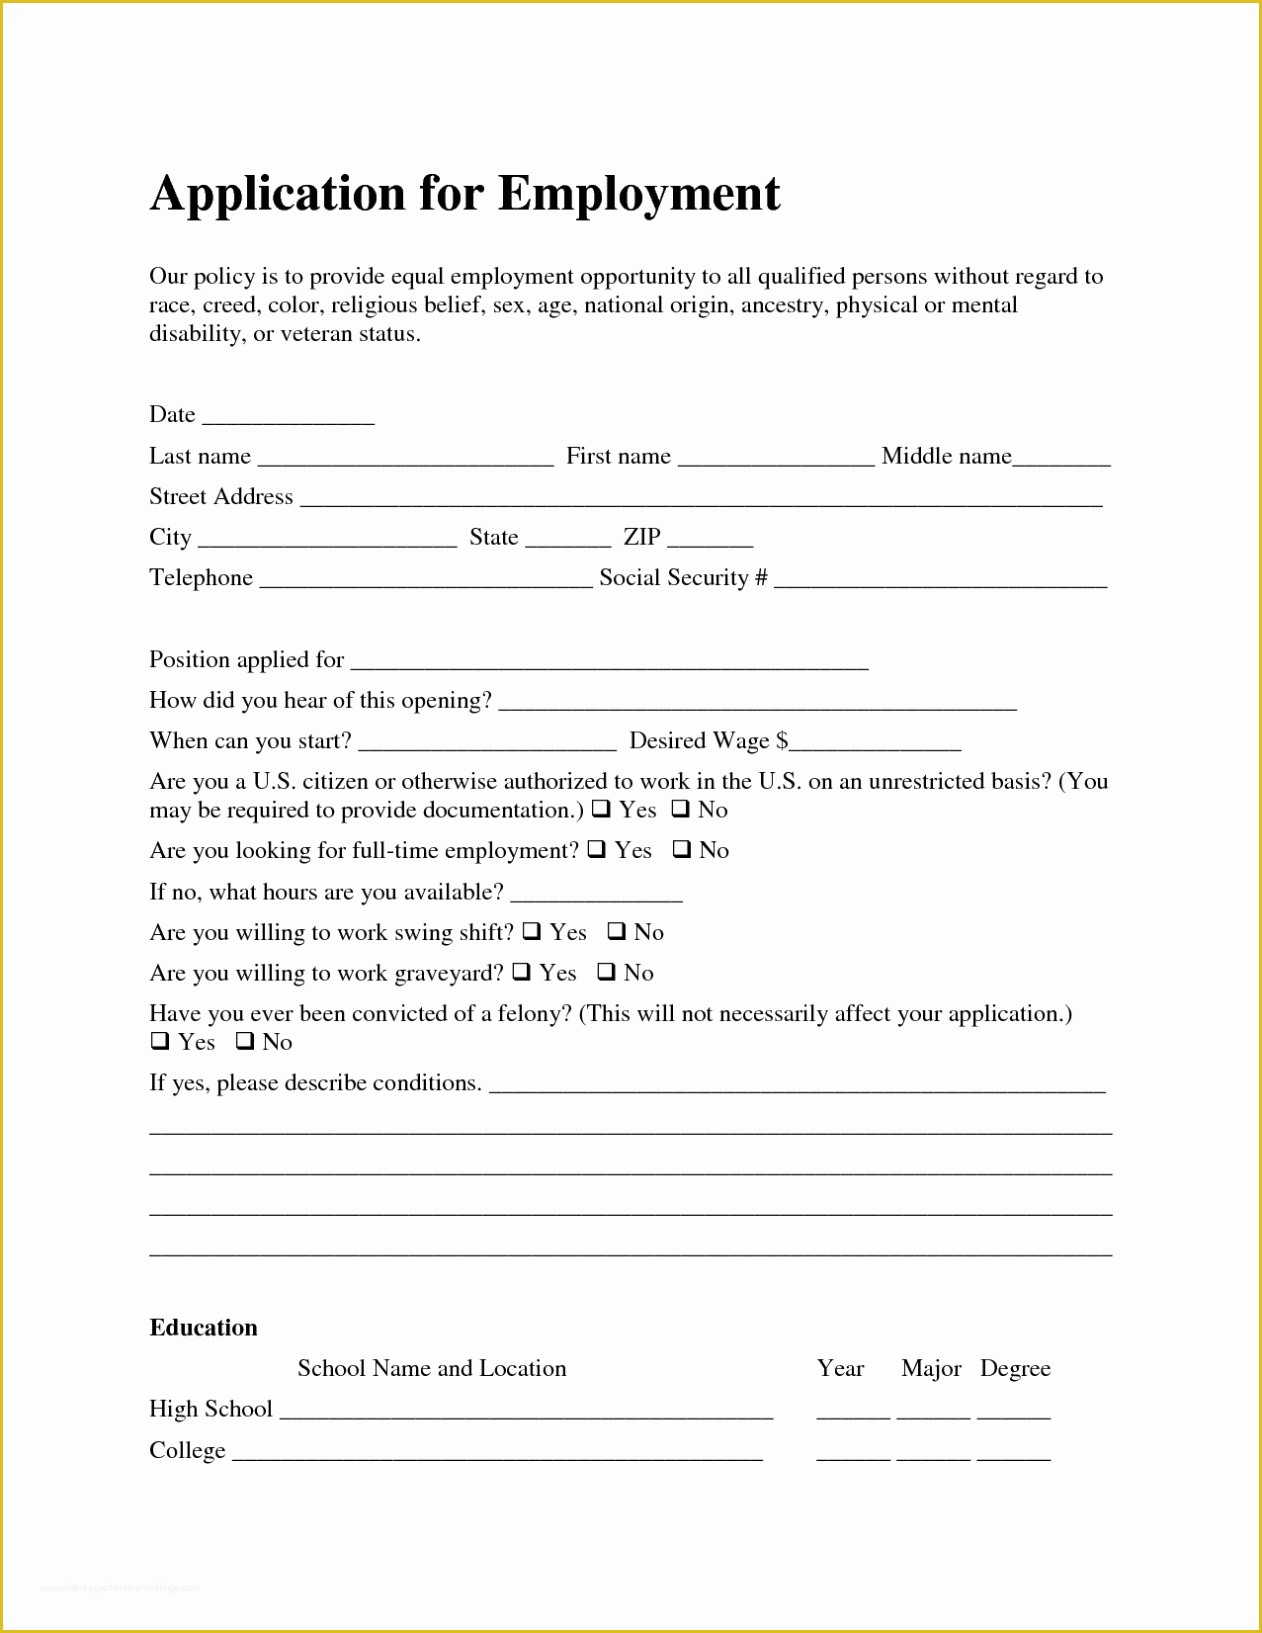 Free Online Application Template Of Free Employment Job Application form Template Sample